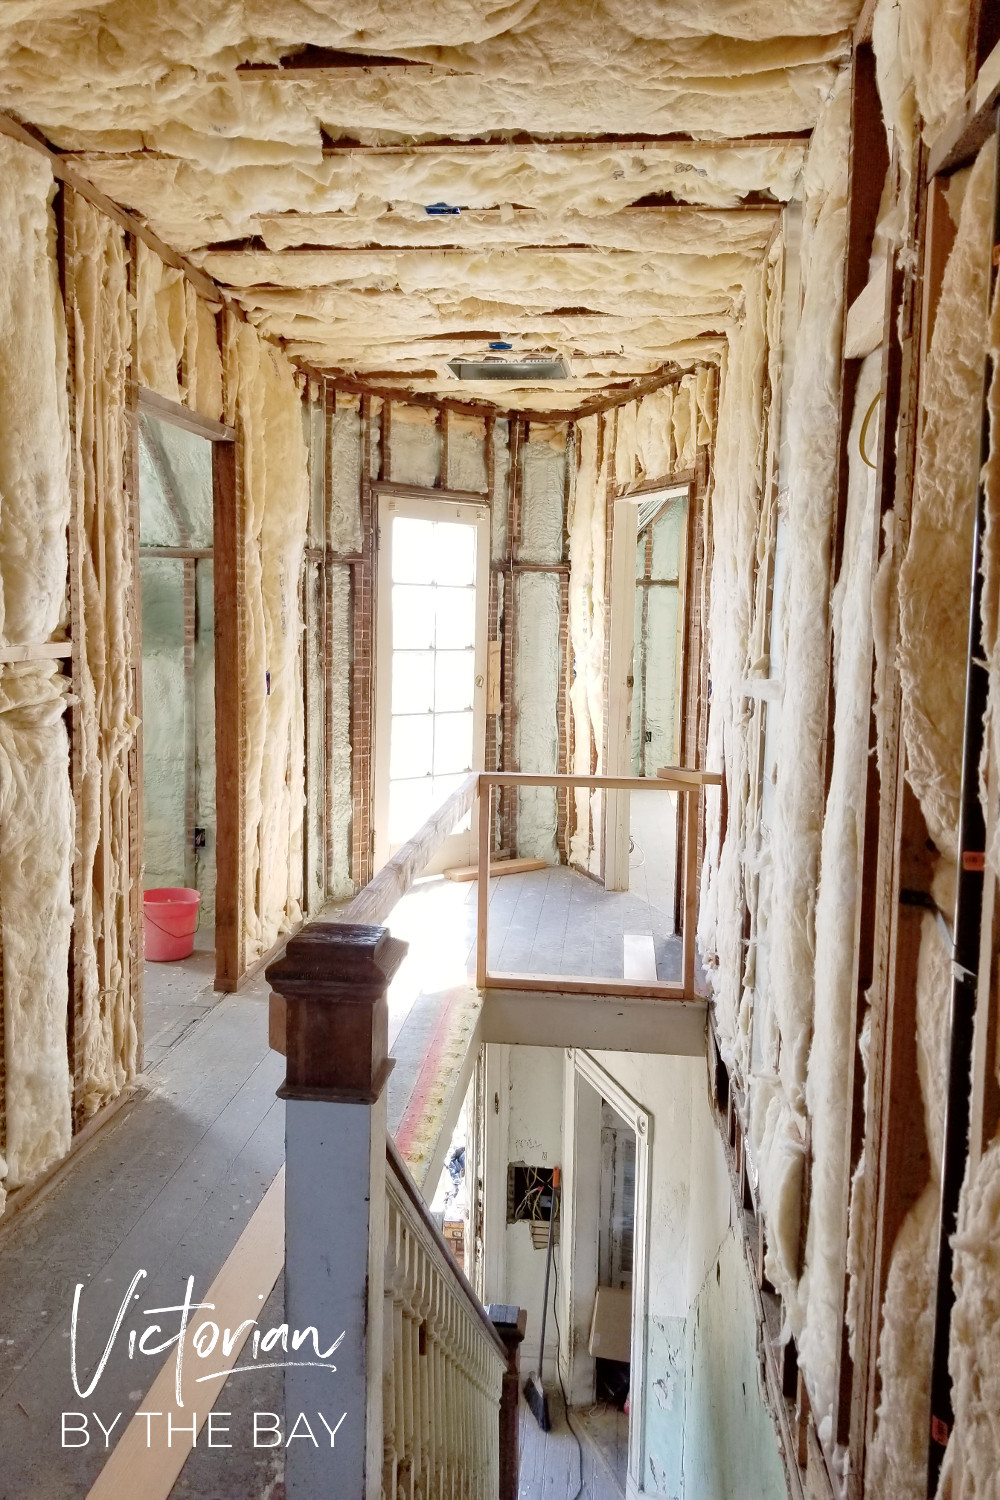 More Insulation at Victorian By The Bay